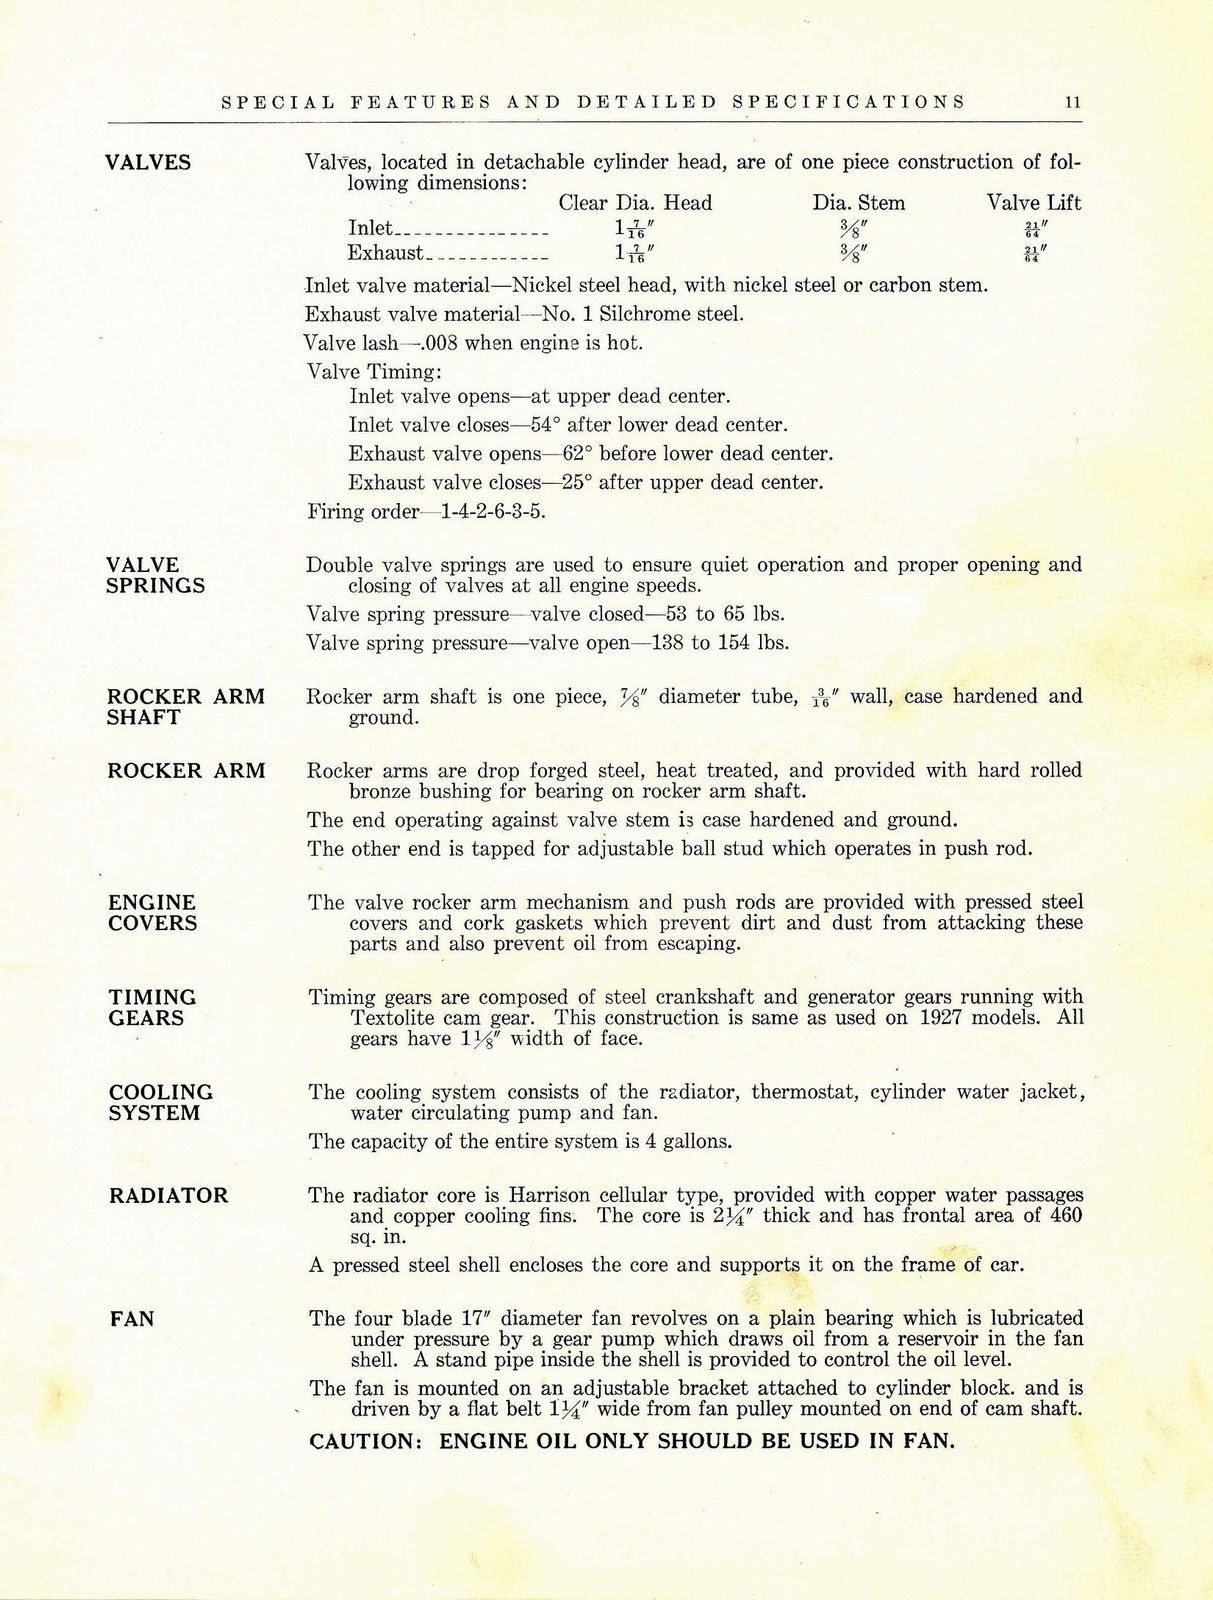 n_1928 Buick Special Features and  Specs-11.jpg